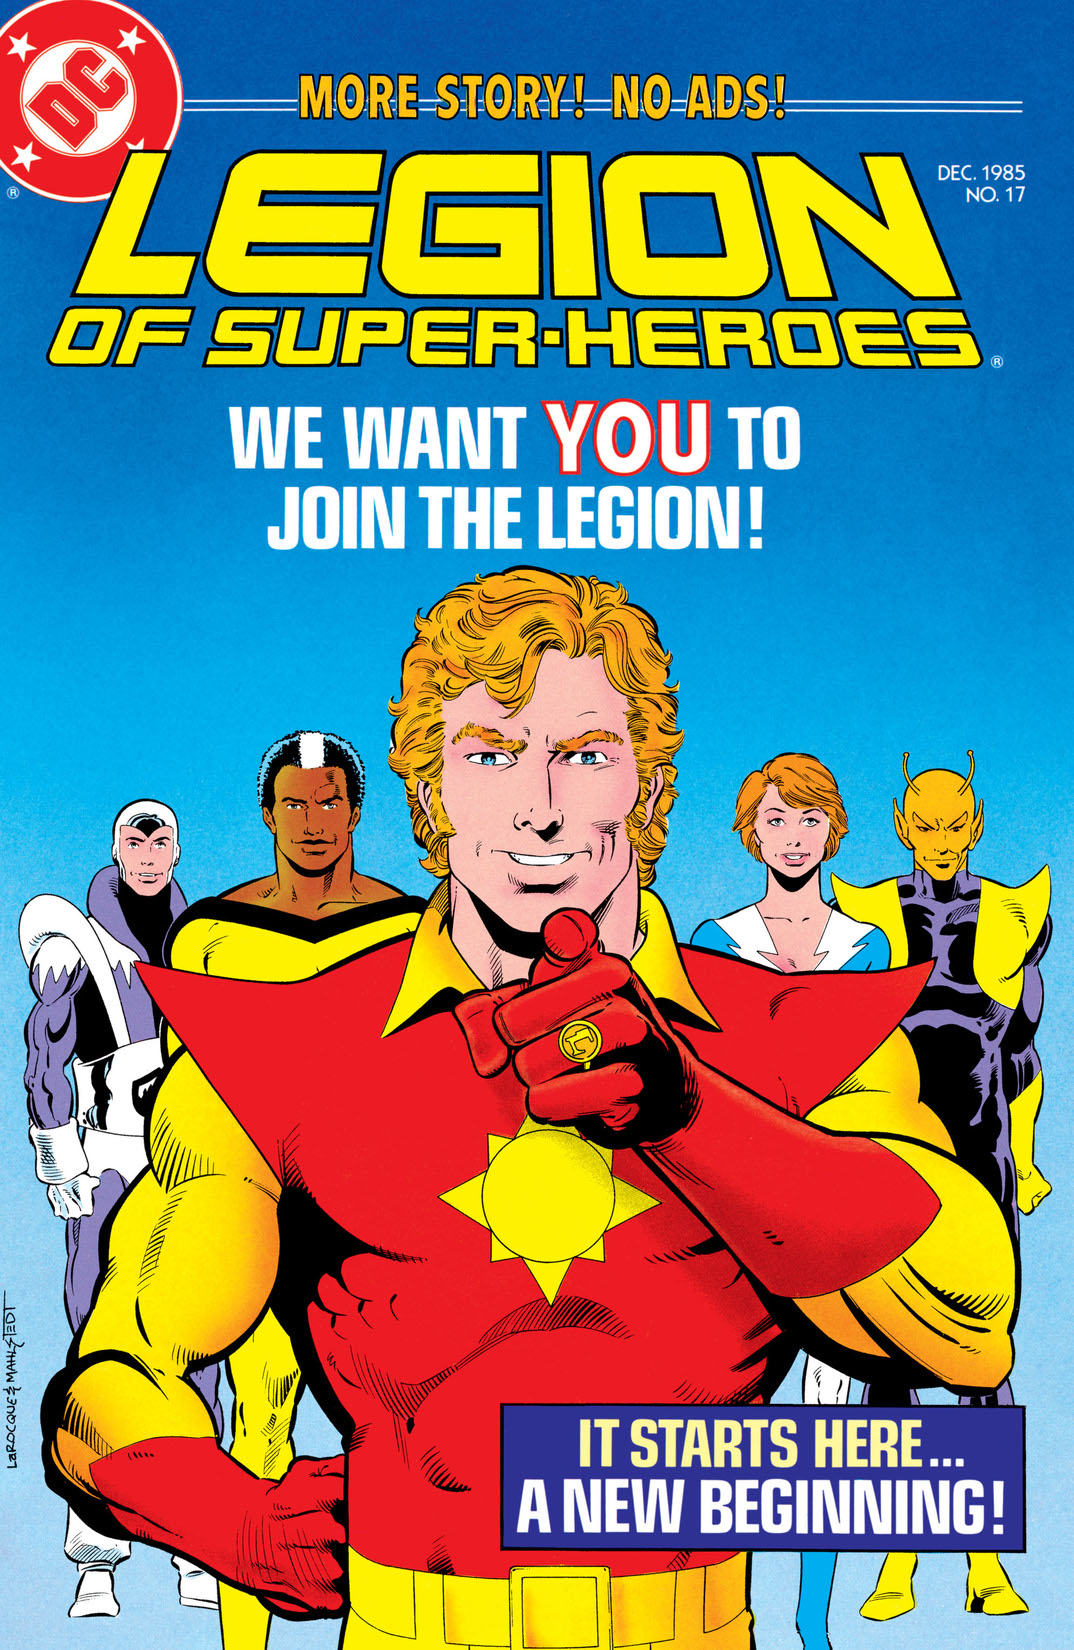 Legion of Super-Heroes (1984-) #17 preview images